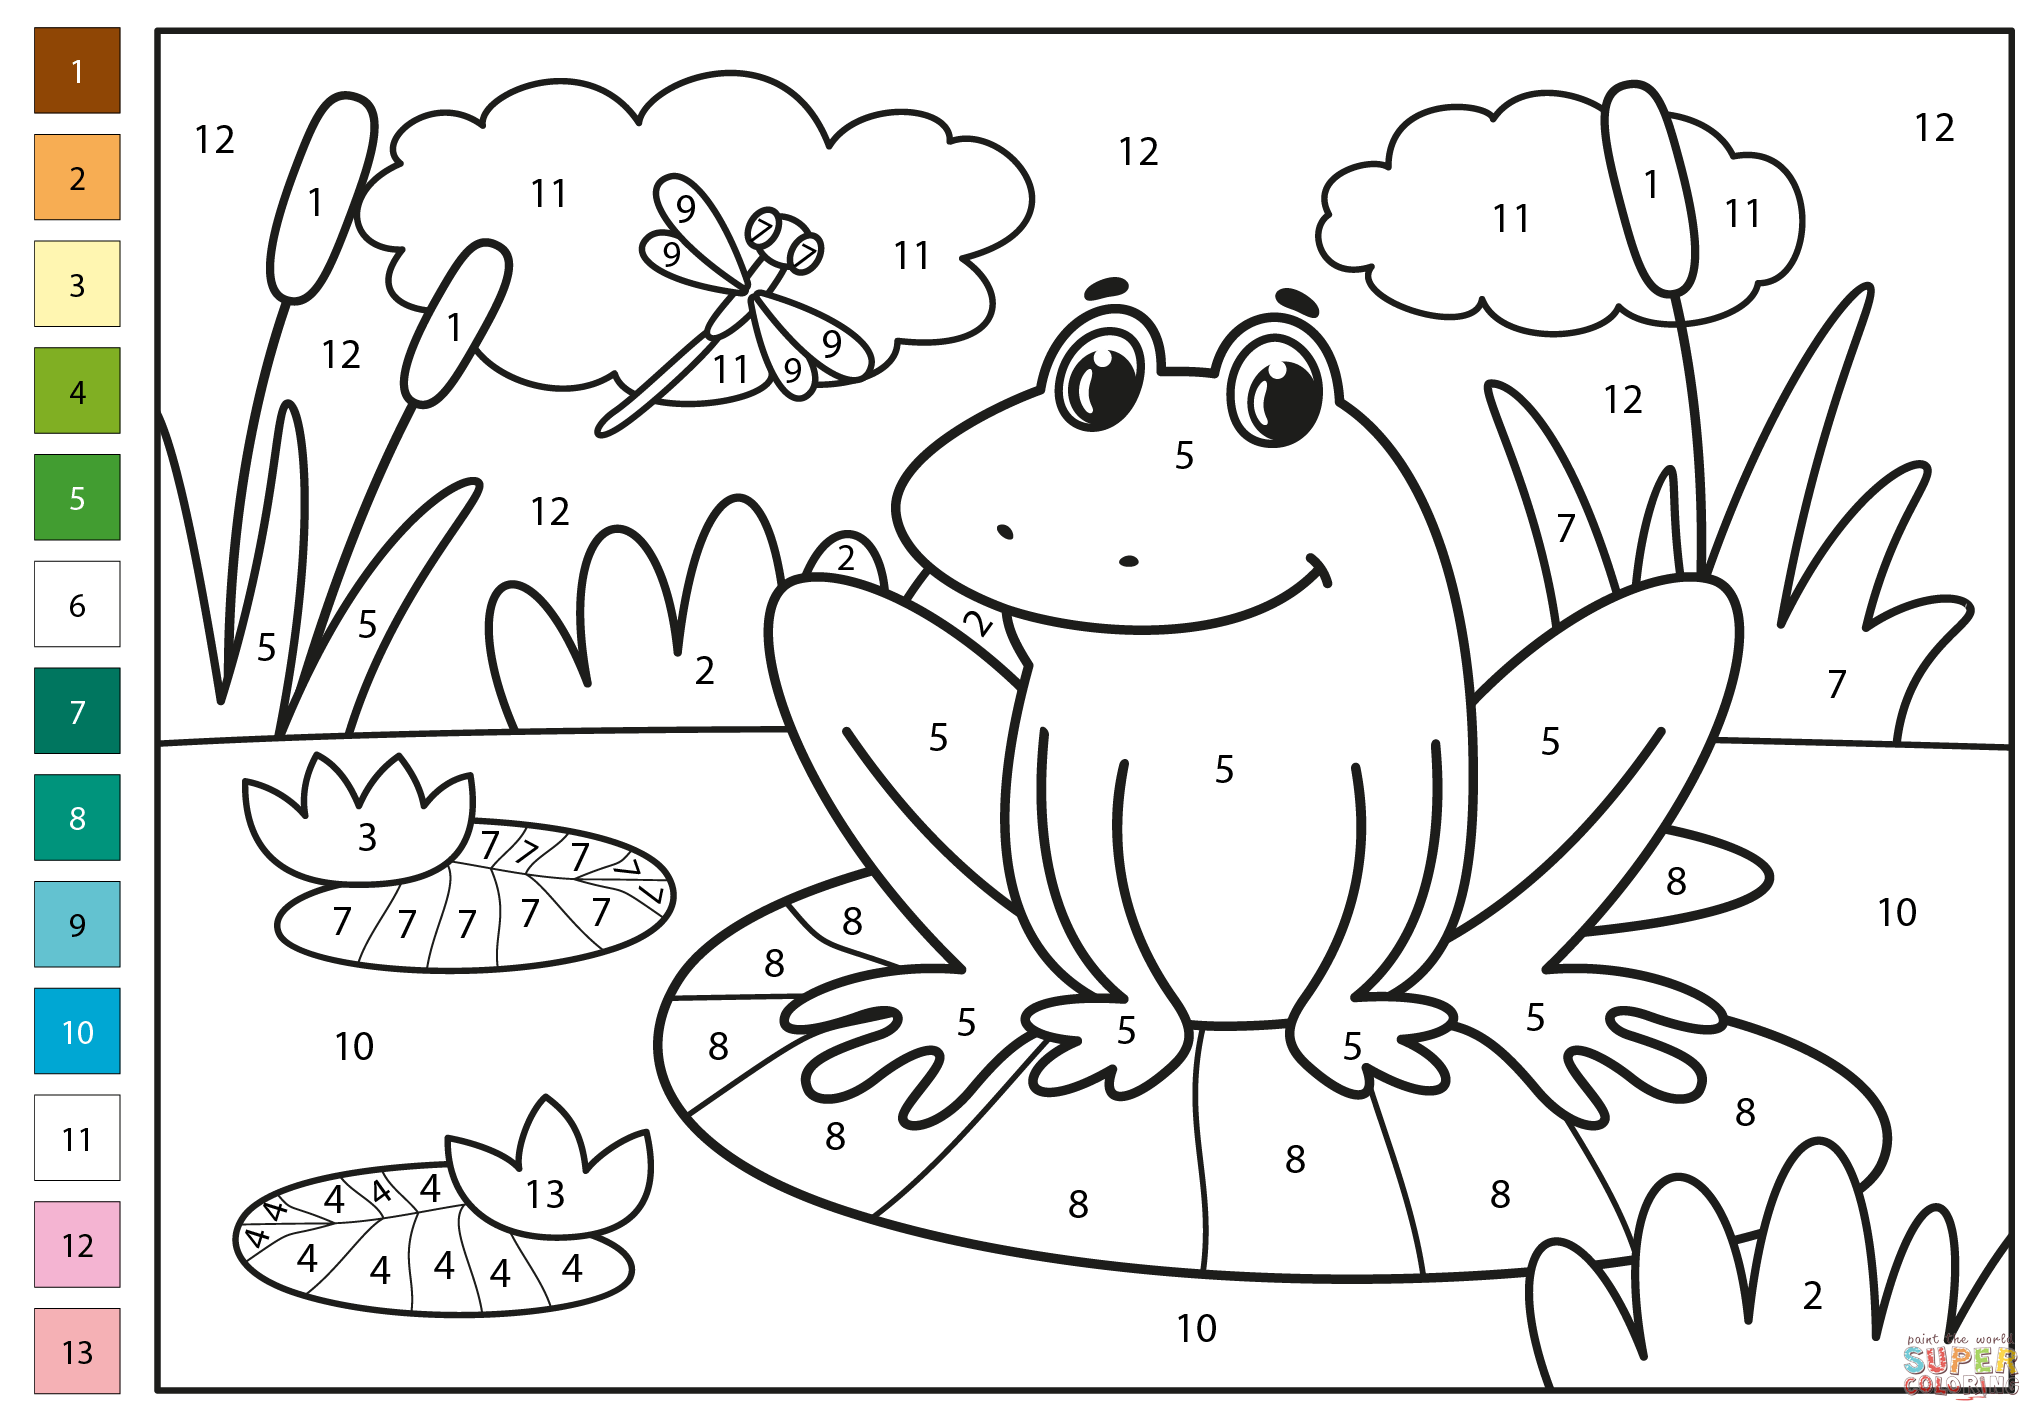 Frog color by number free printable coloring pages